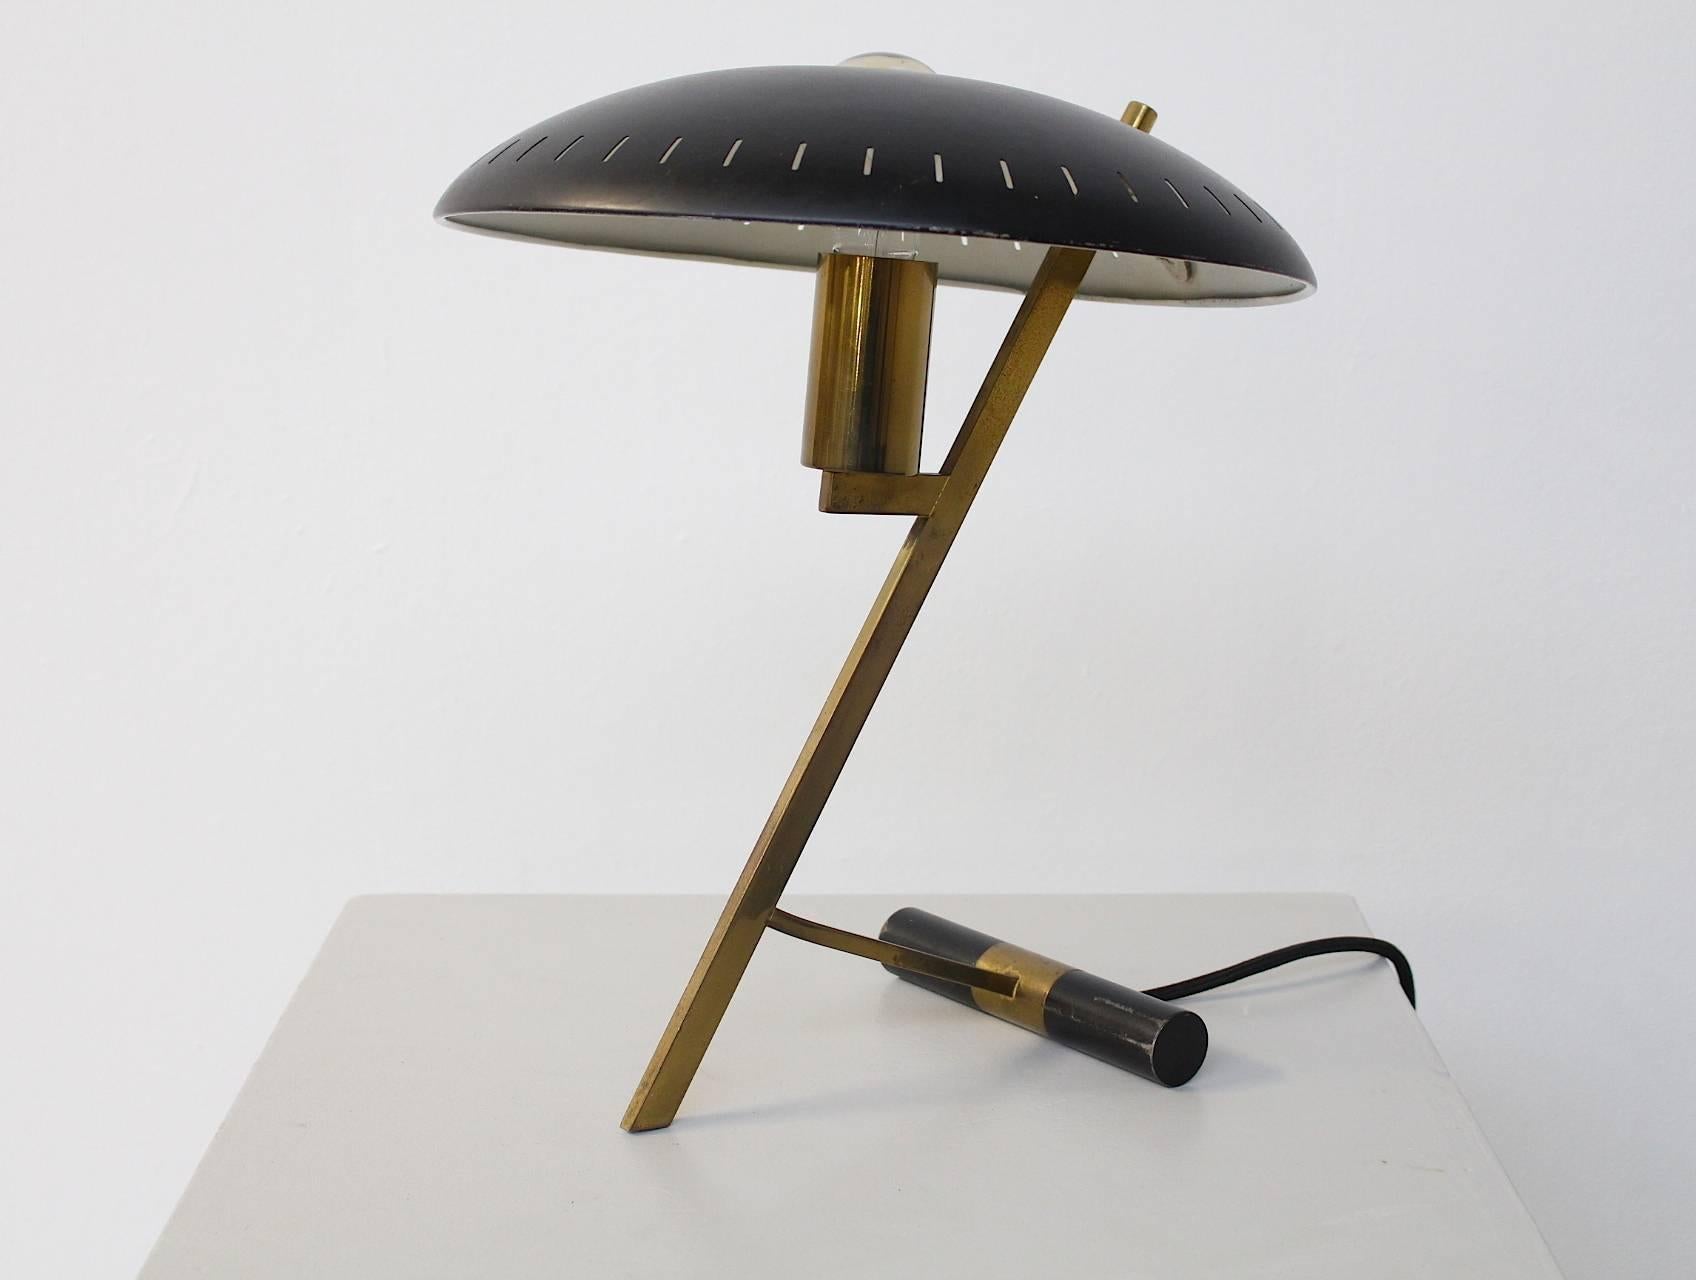 An iconic Dutch-industrial desk or table lamp designed by designer and architect Louis Kalff; for the Philips Company, Holland, 1955. This is the first edition with a brass frame and the black disk-shaped perforated black lacquered shade. The shade